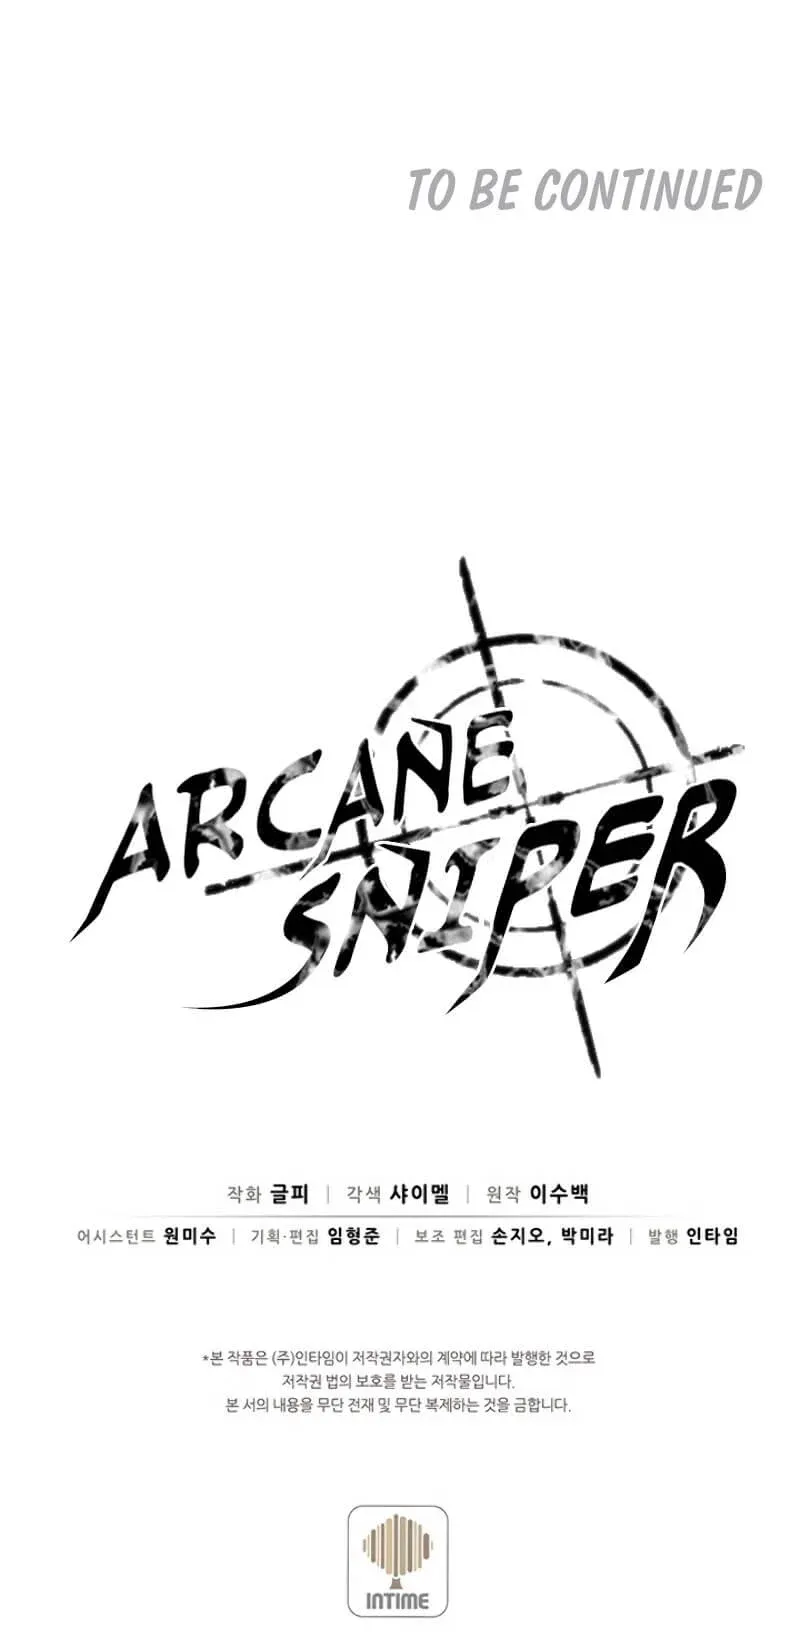 arcane sniper, Chapter 25 - English Scans